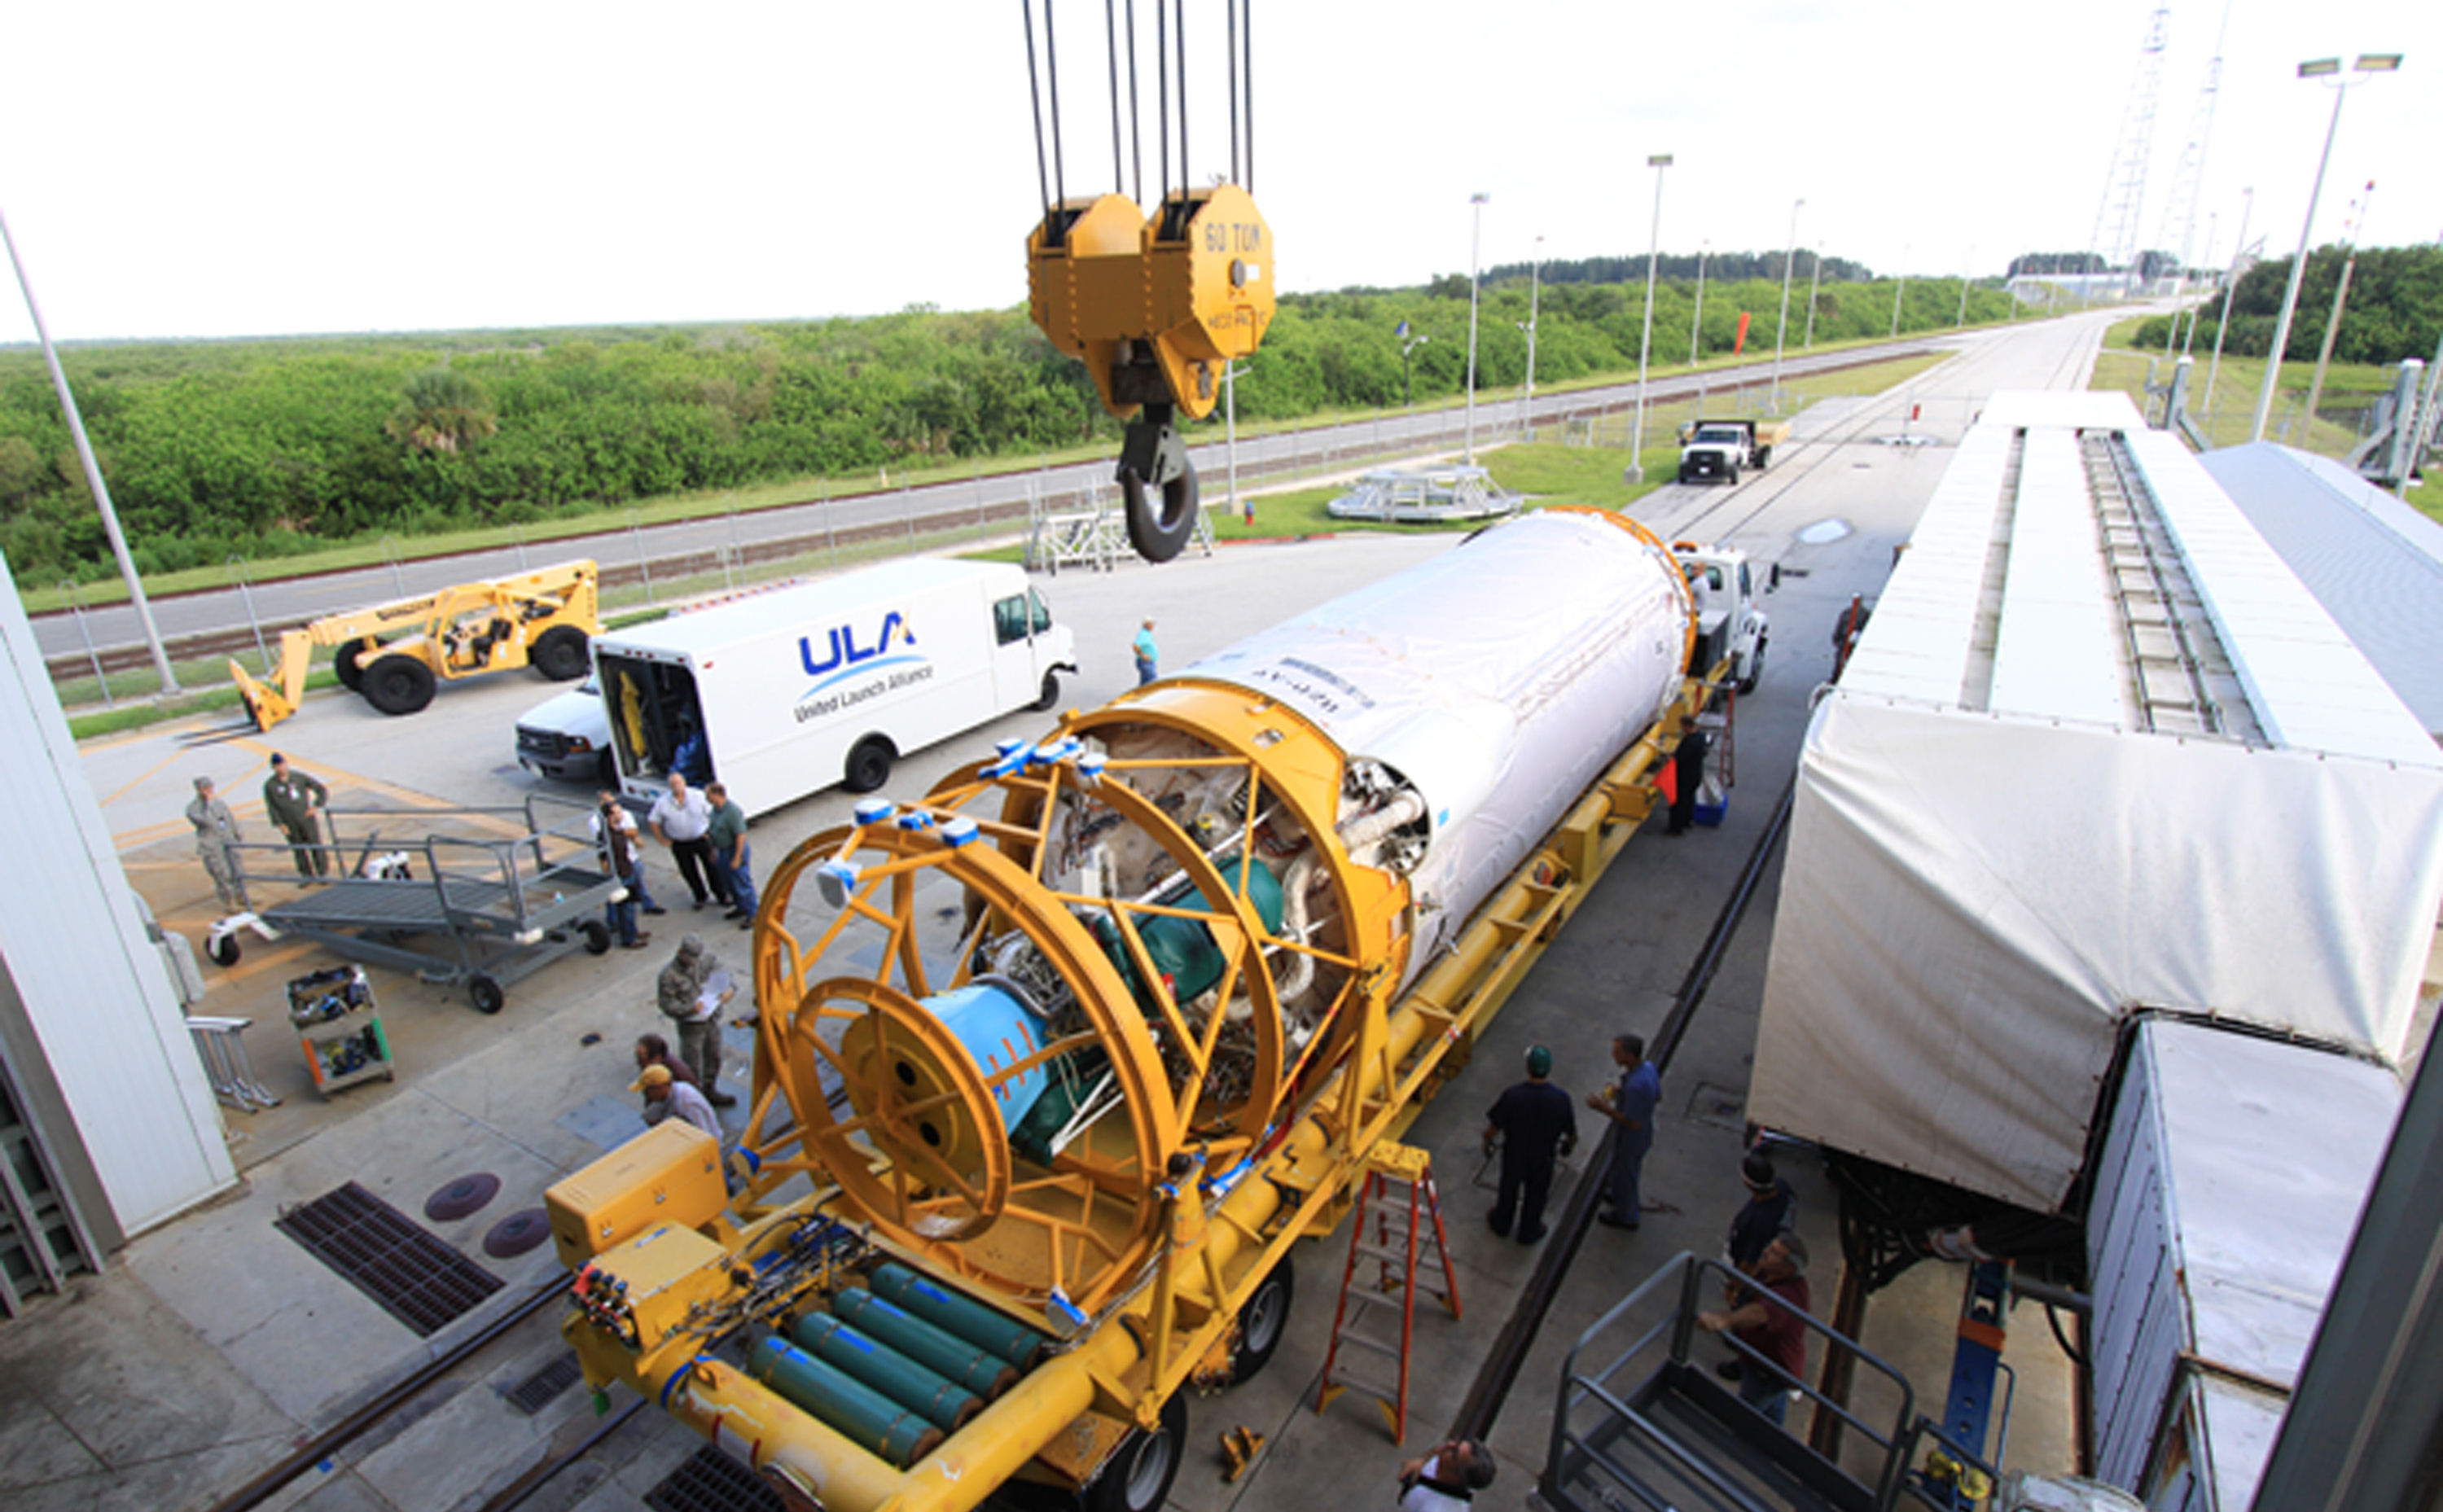 At Launch Complex 41 at Cape Canaveral Air Force Station in Florida, an overhead crane will be used to lift the Centaur upper stage for the United Launch Alliance Atlas V into the Vertical Integration Facility (VIF).